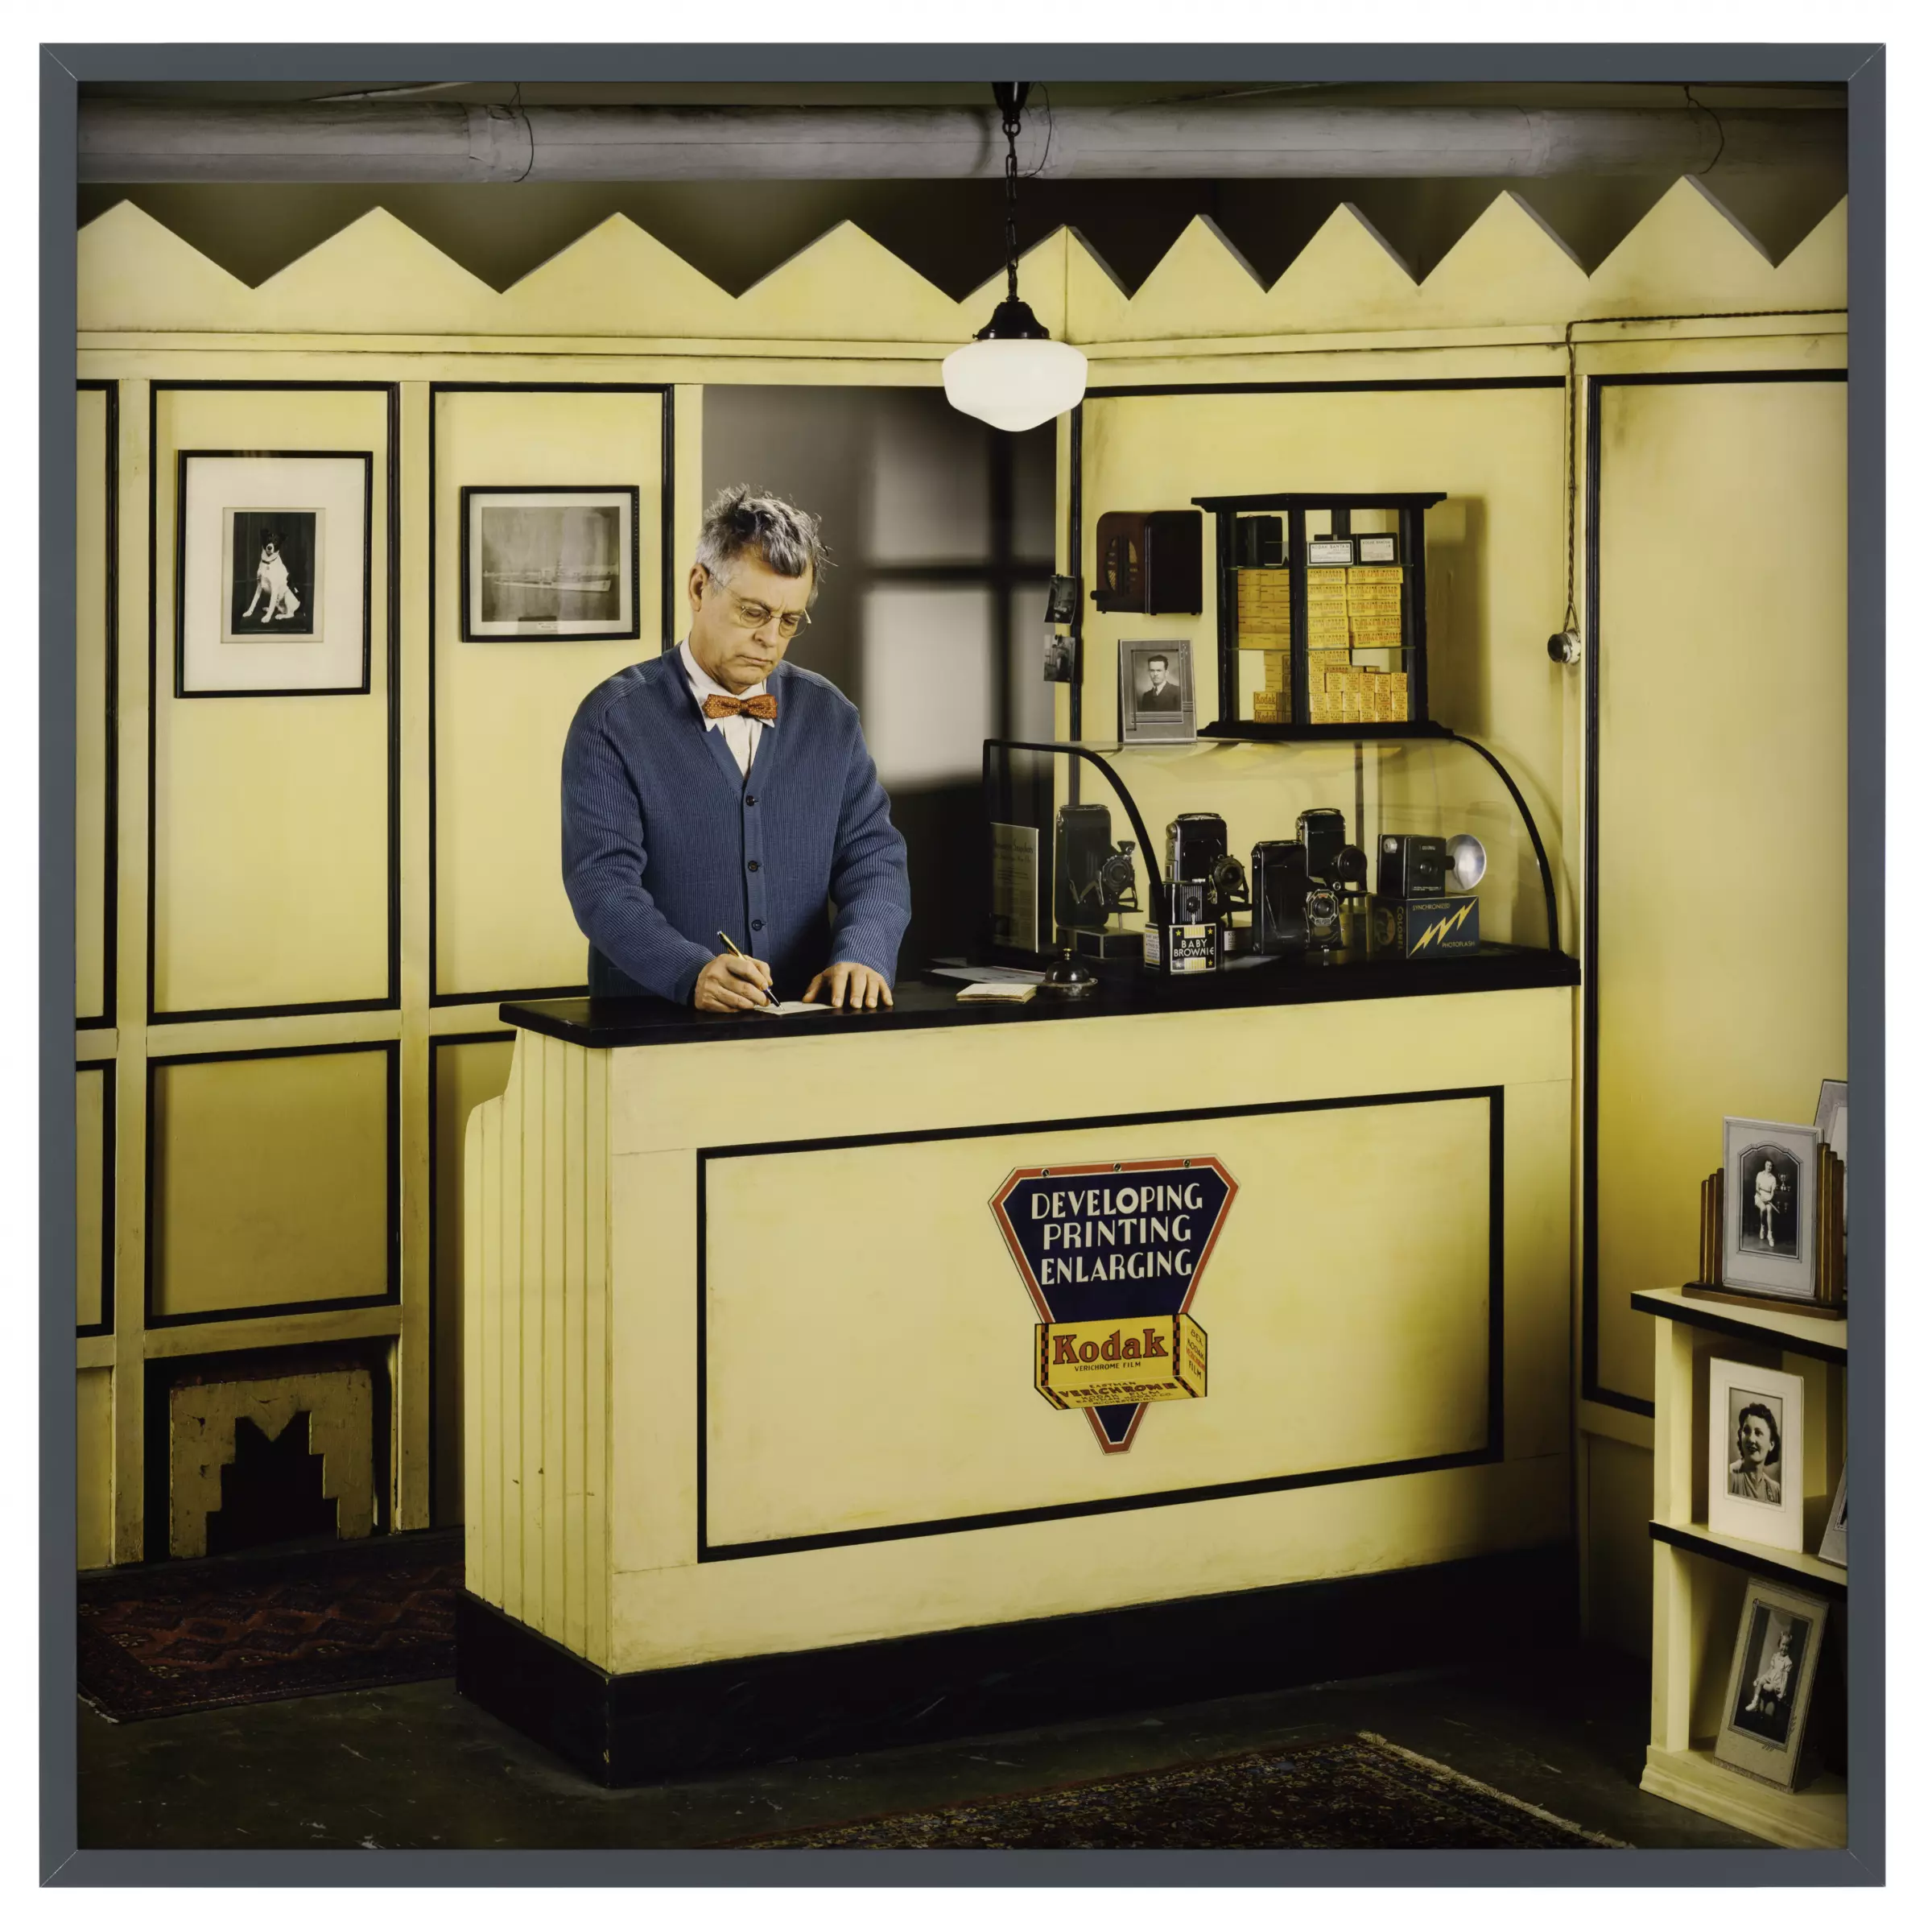 A man in a cardigan and bowtie stands behind the counter of a small booth. A Kodak advertisement reads 'developing printing enlarging'